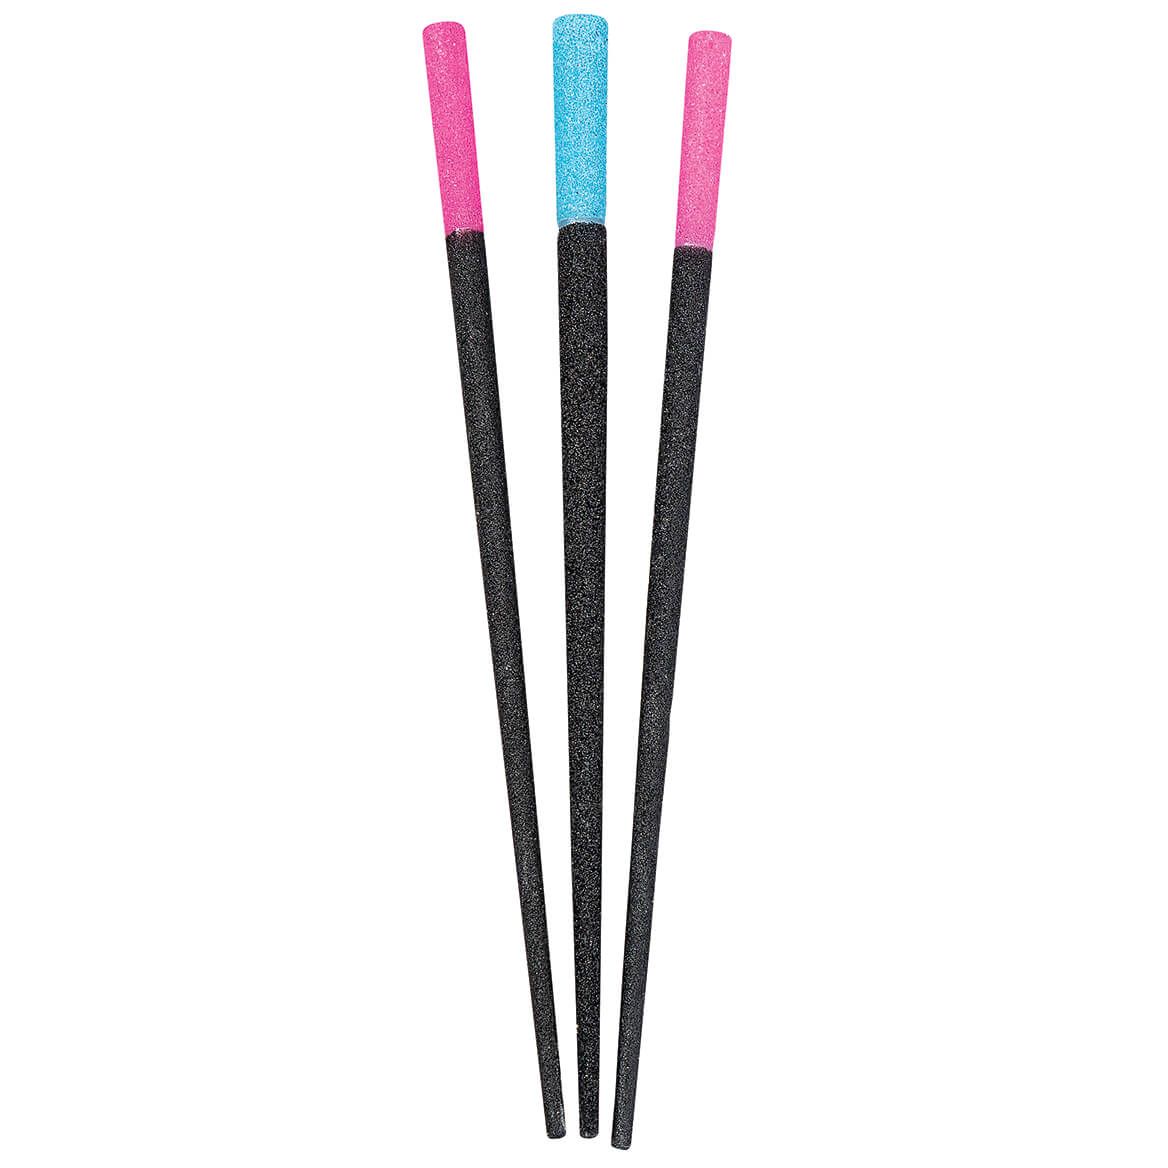 Finger and Toe Cuticle Files, Set of 3 + '-' + 371587